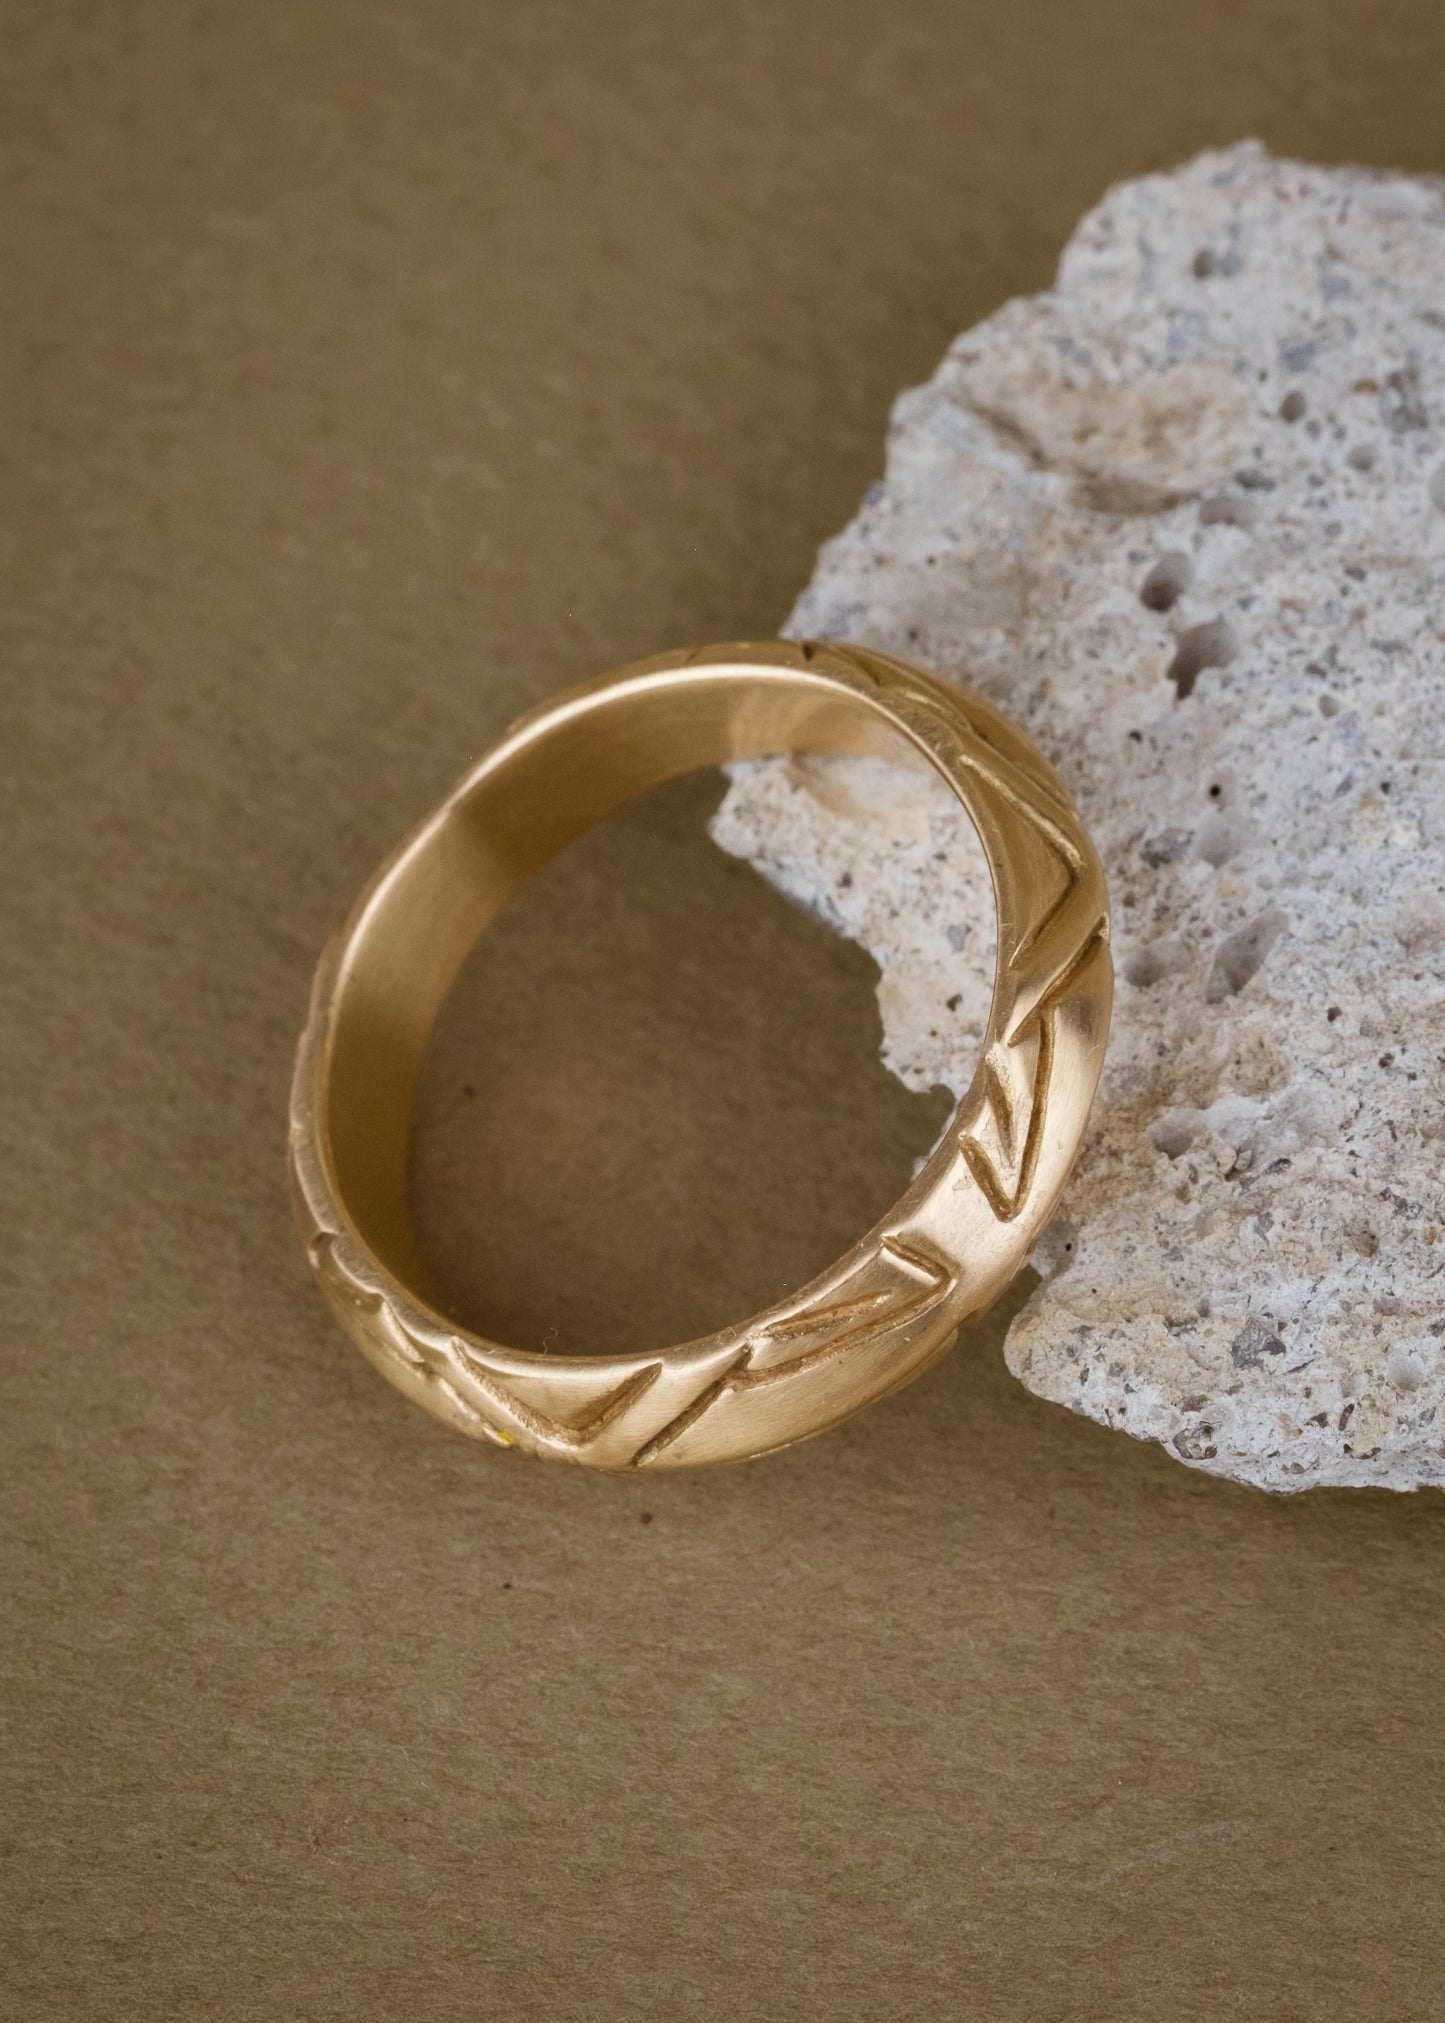 Like the dear friend for whom it is named, the Ogden is a man’s wedding band with a ton of character. This solid, masculine gold ring exudes strength and substance.